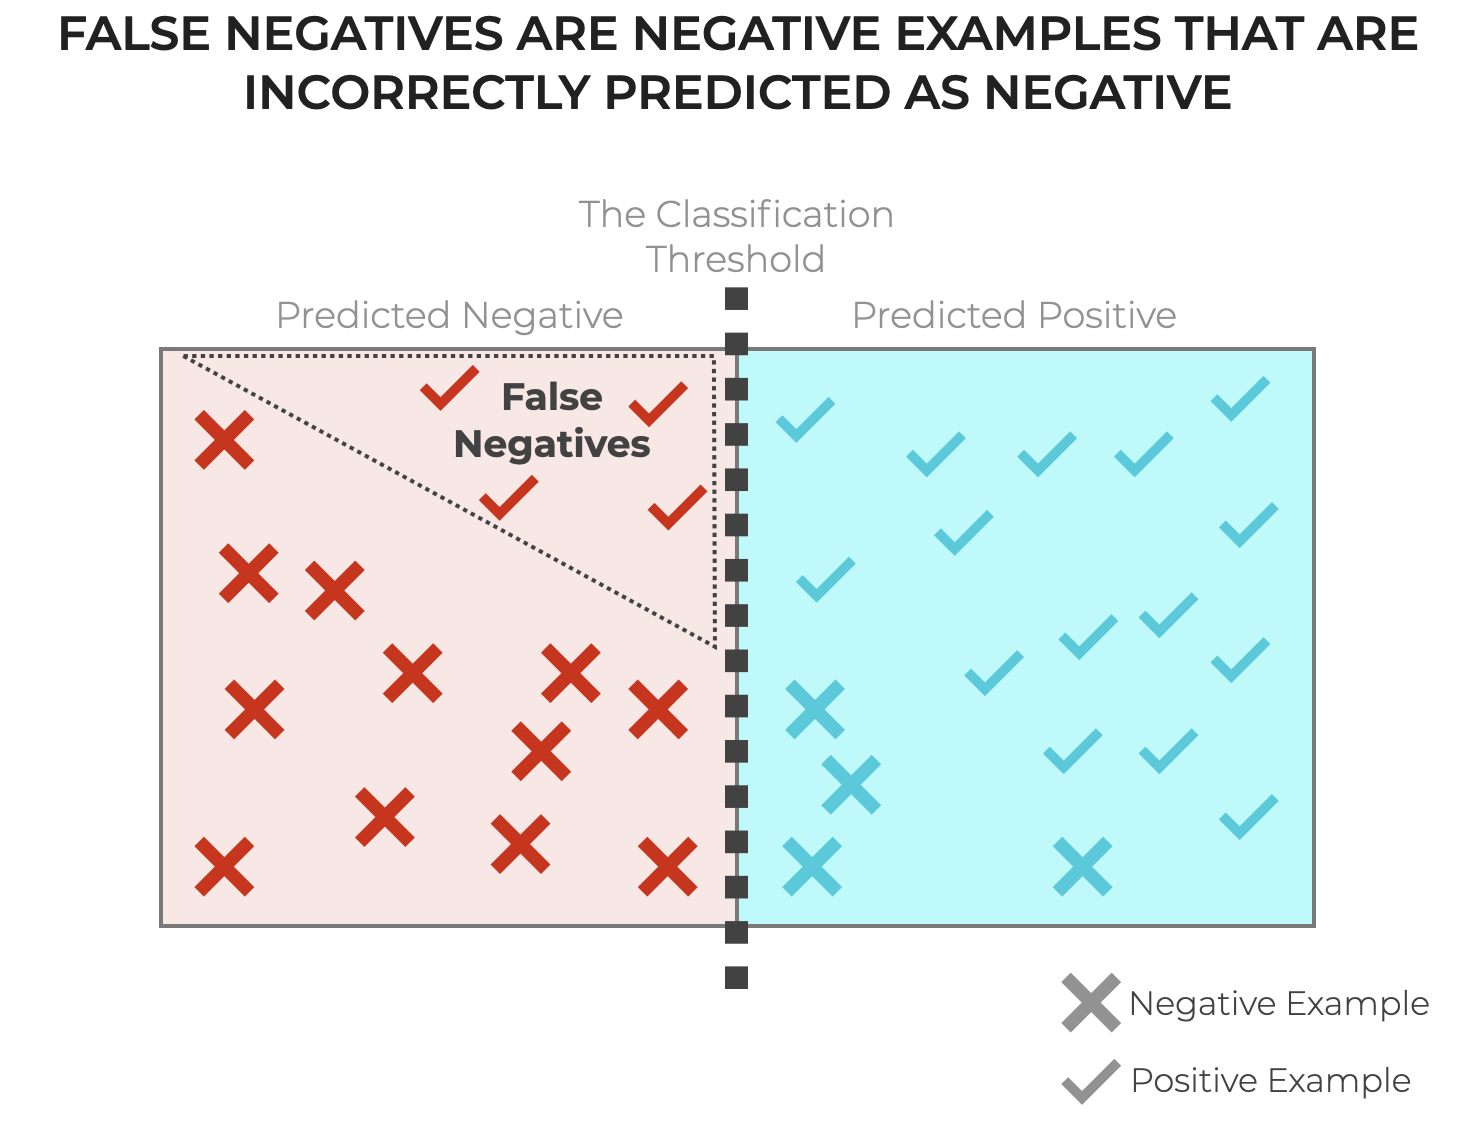 An image of False Negatives, and how they relate to threshold, TP, TN, and FP.